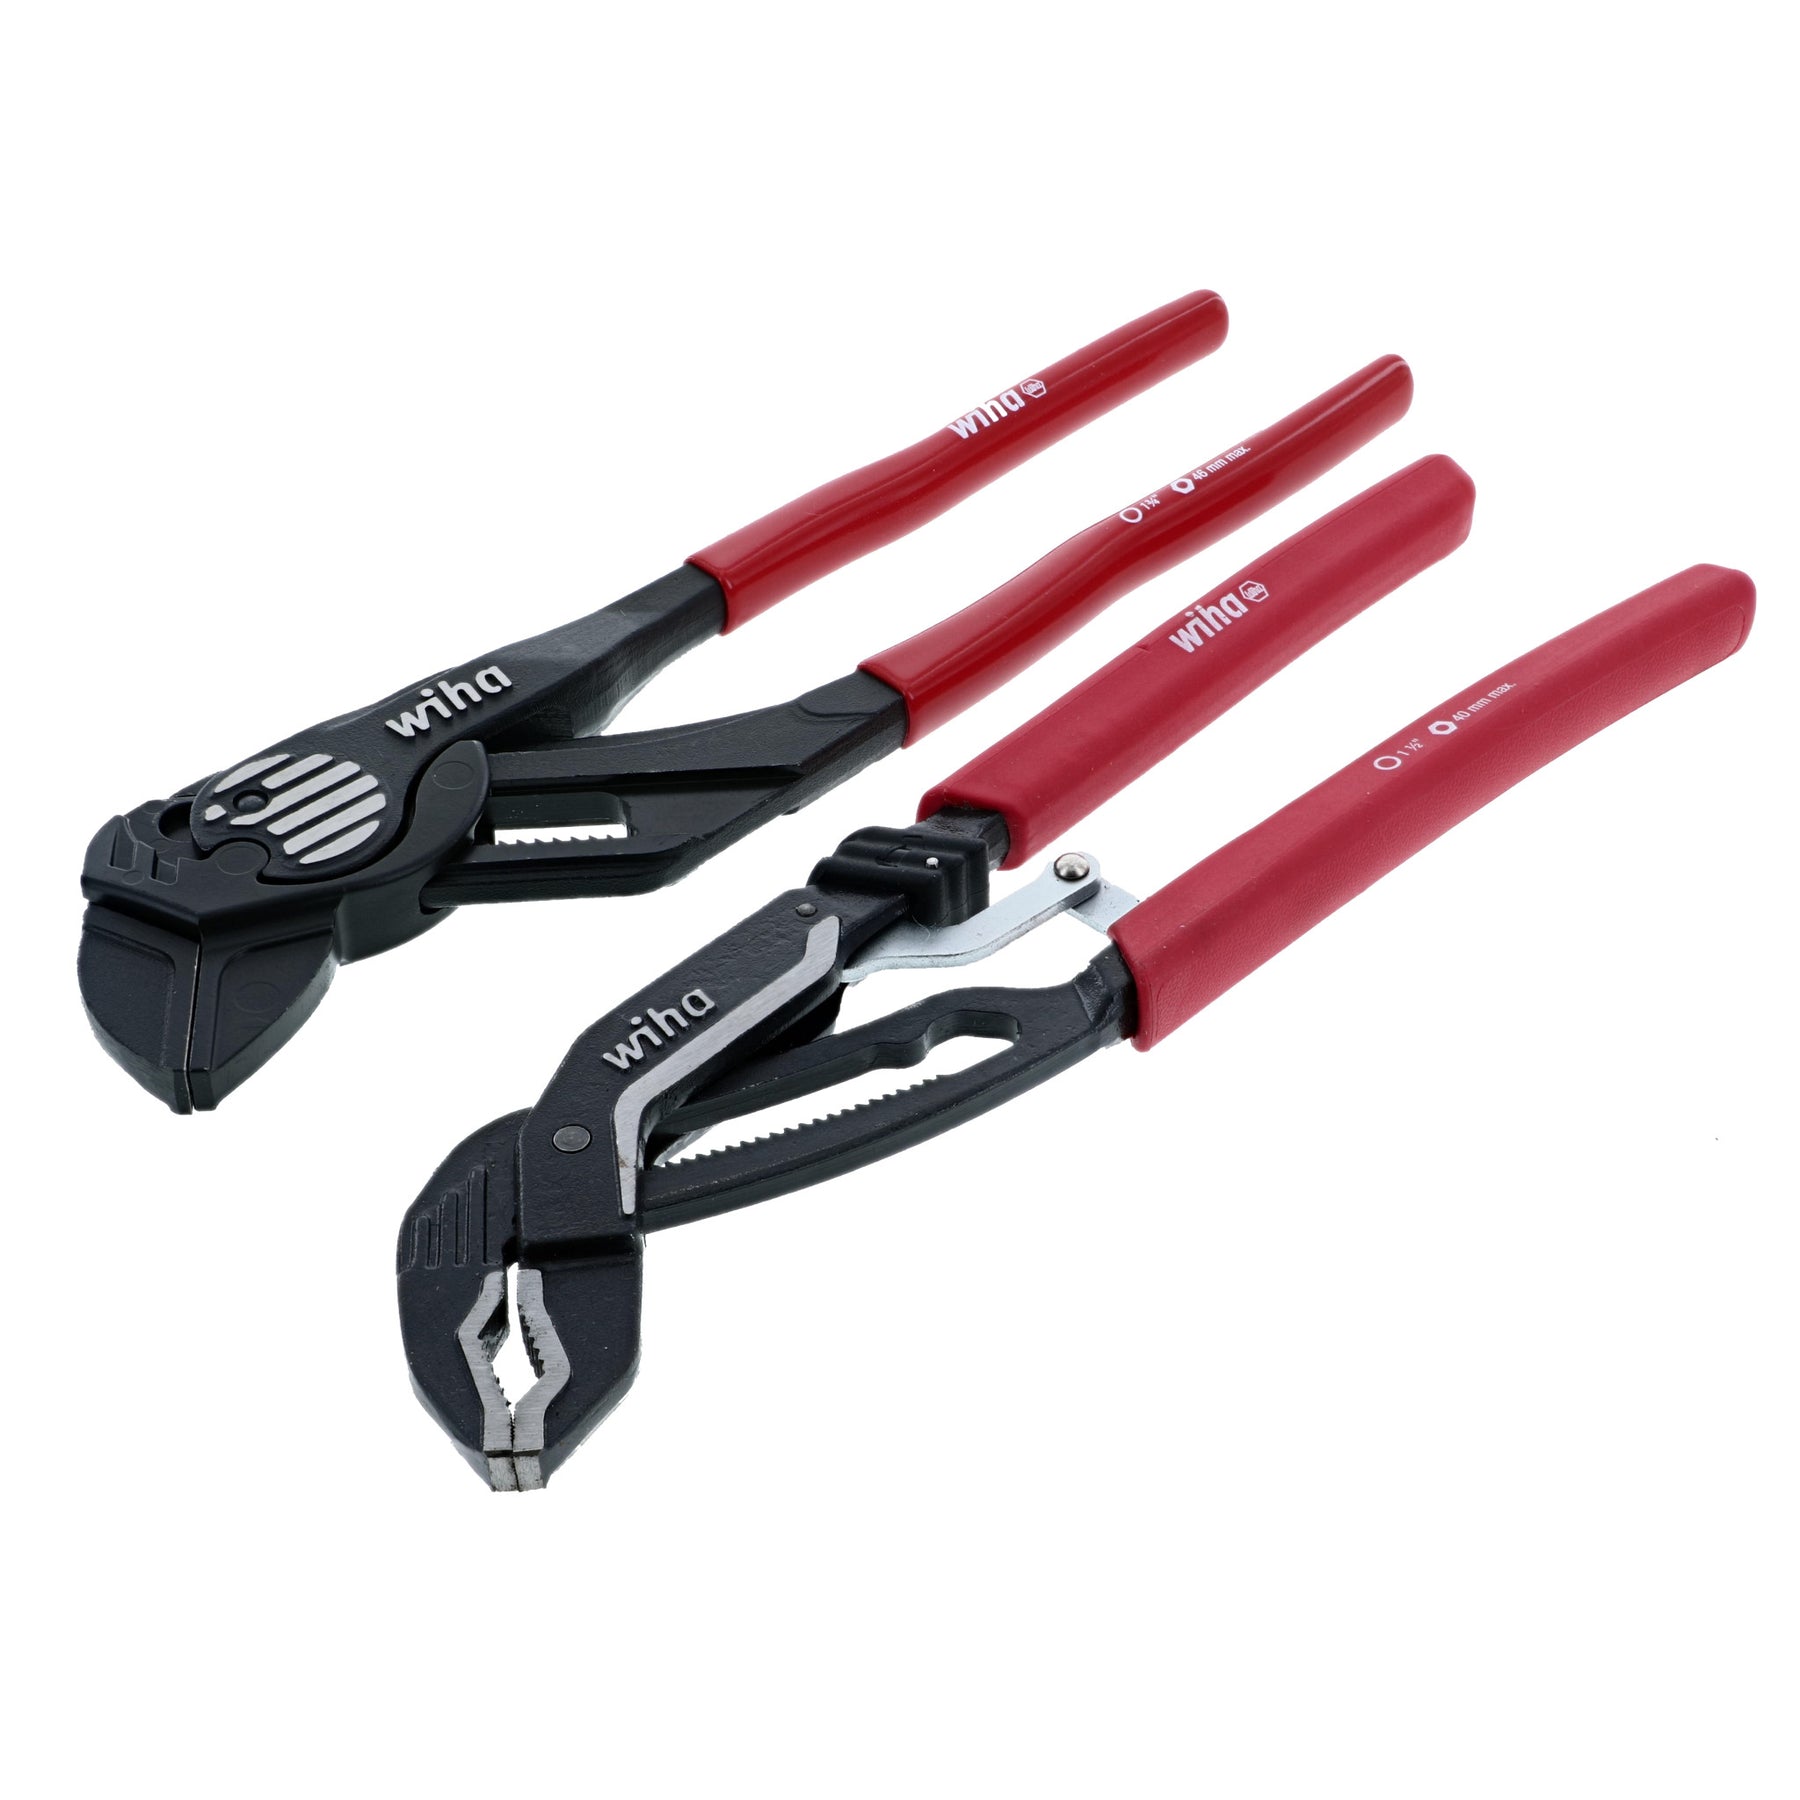 2 Piece Classic Grip Pliers Wrench and Auto Pliers Set